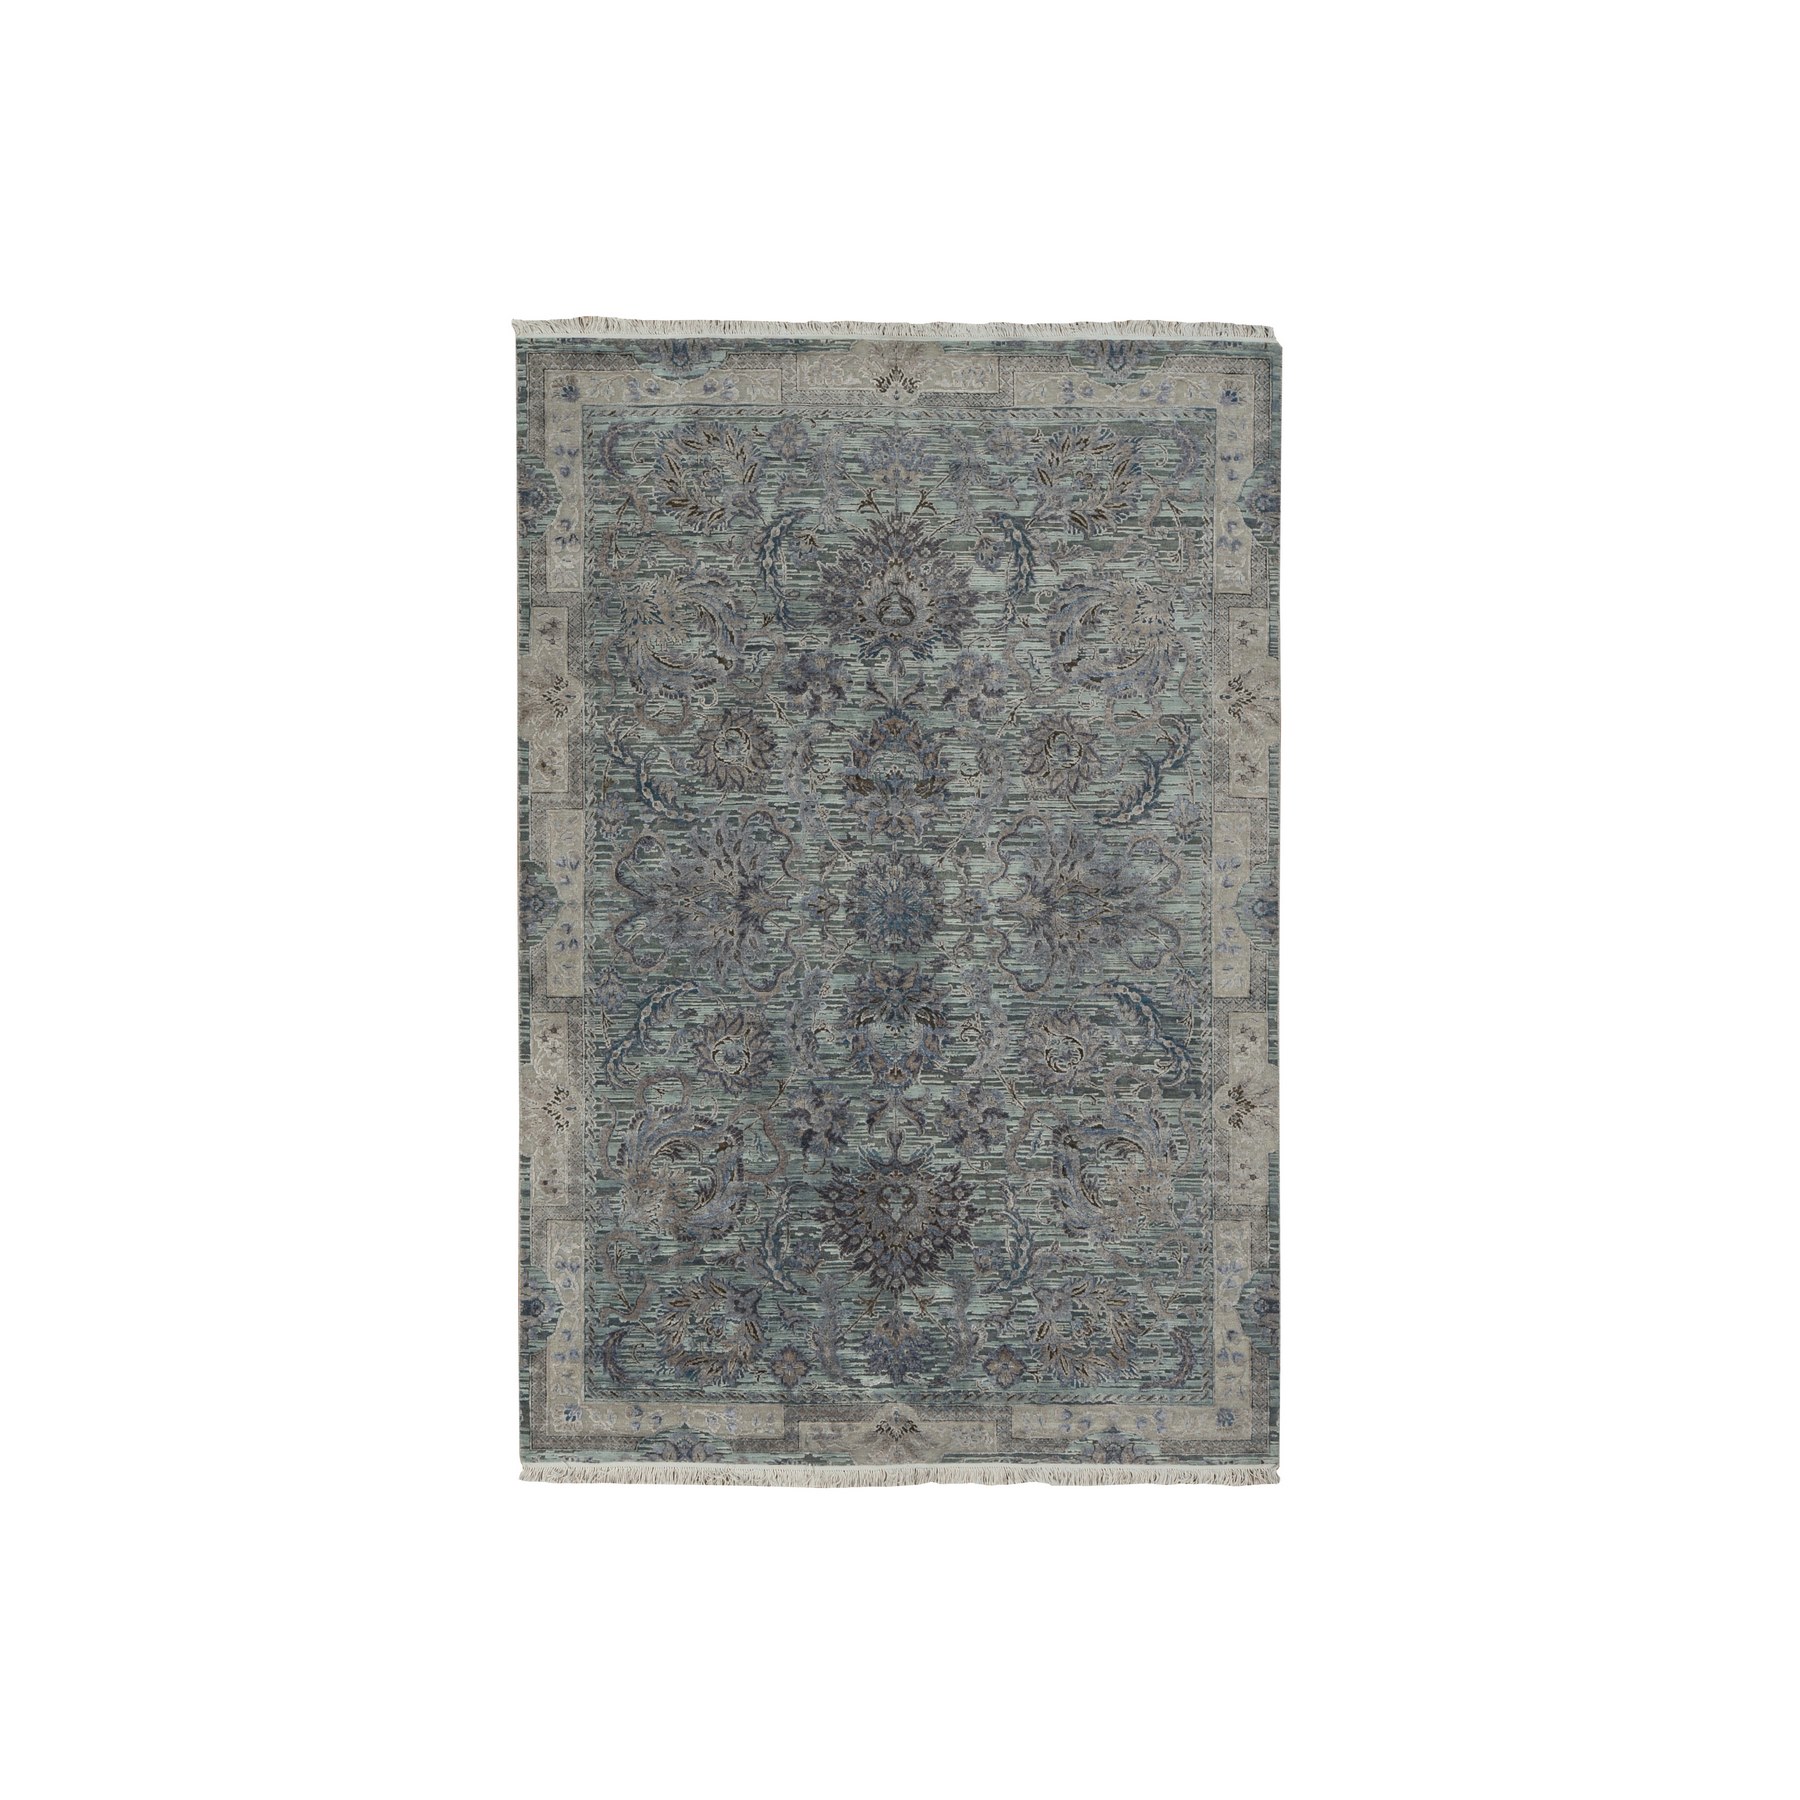 Transitional Rugs LUV702990